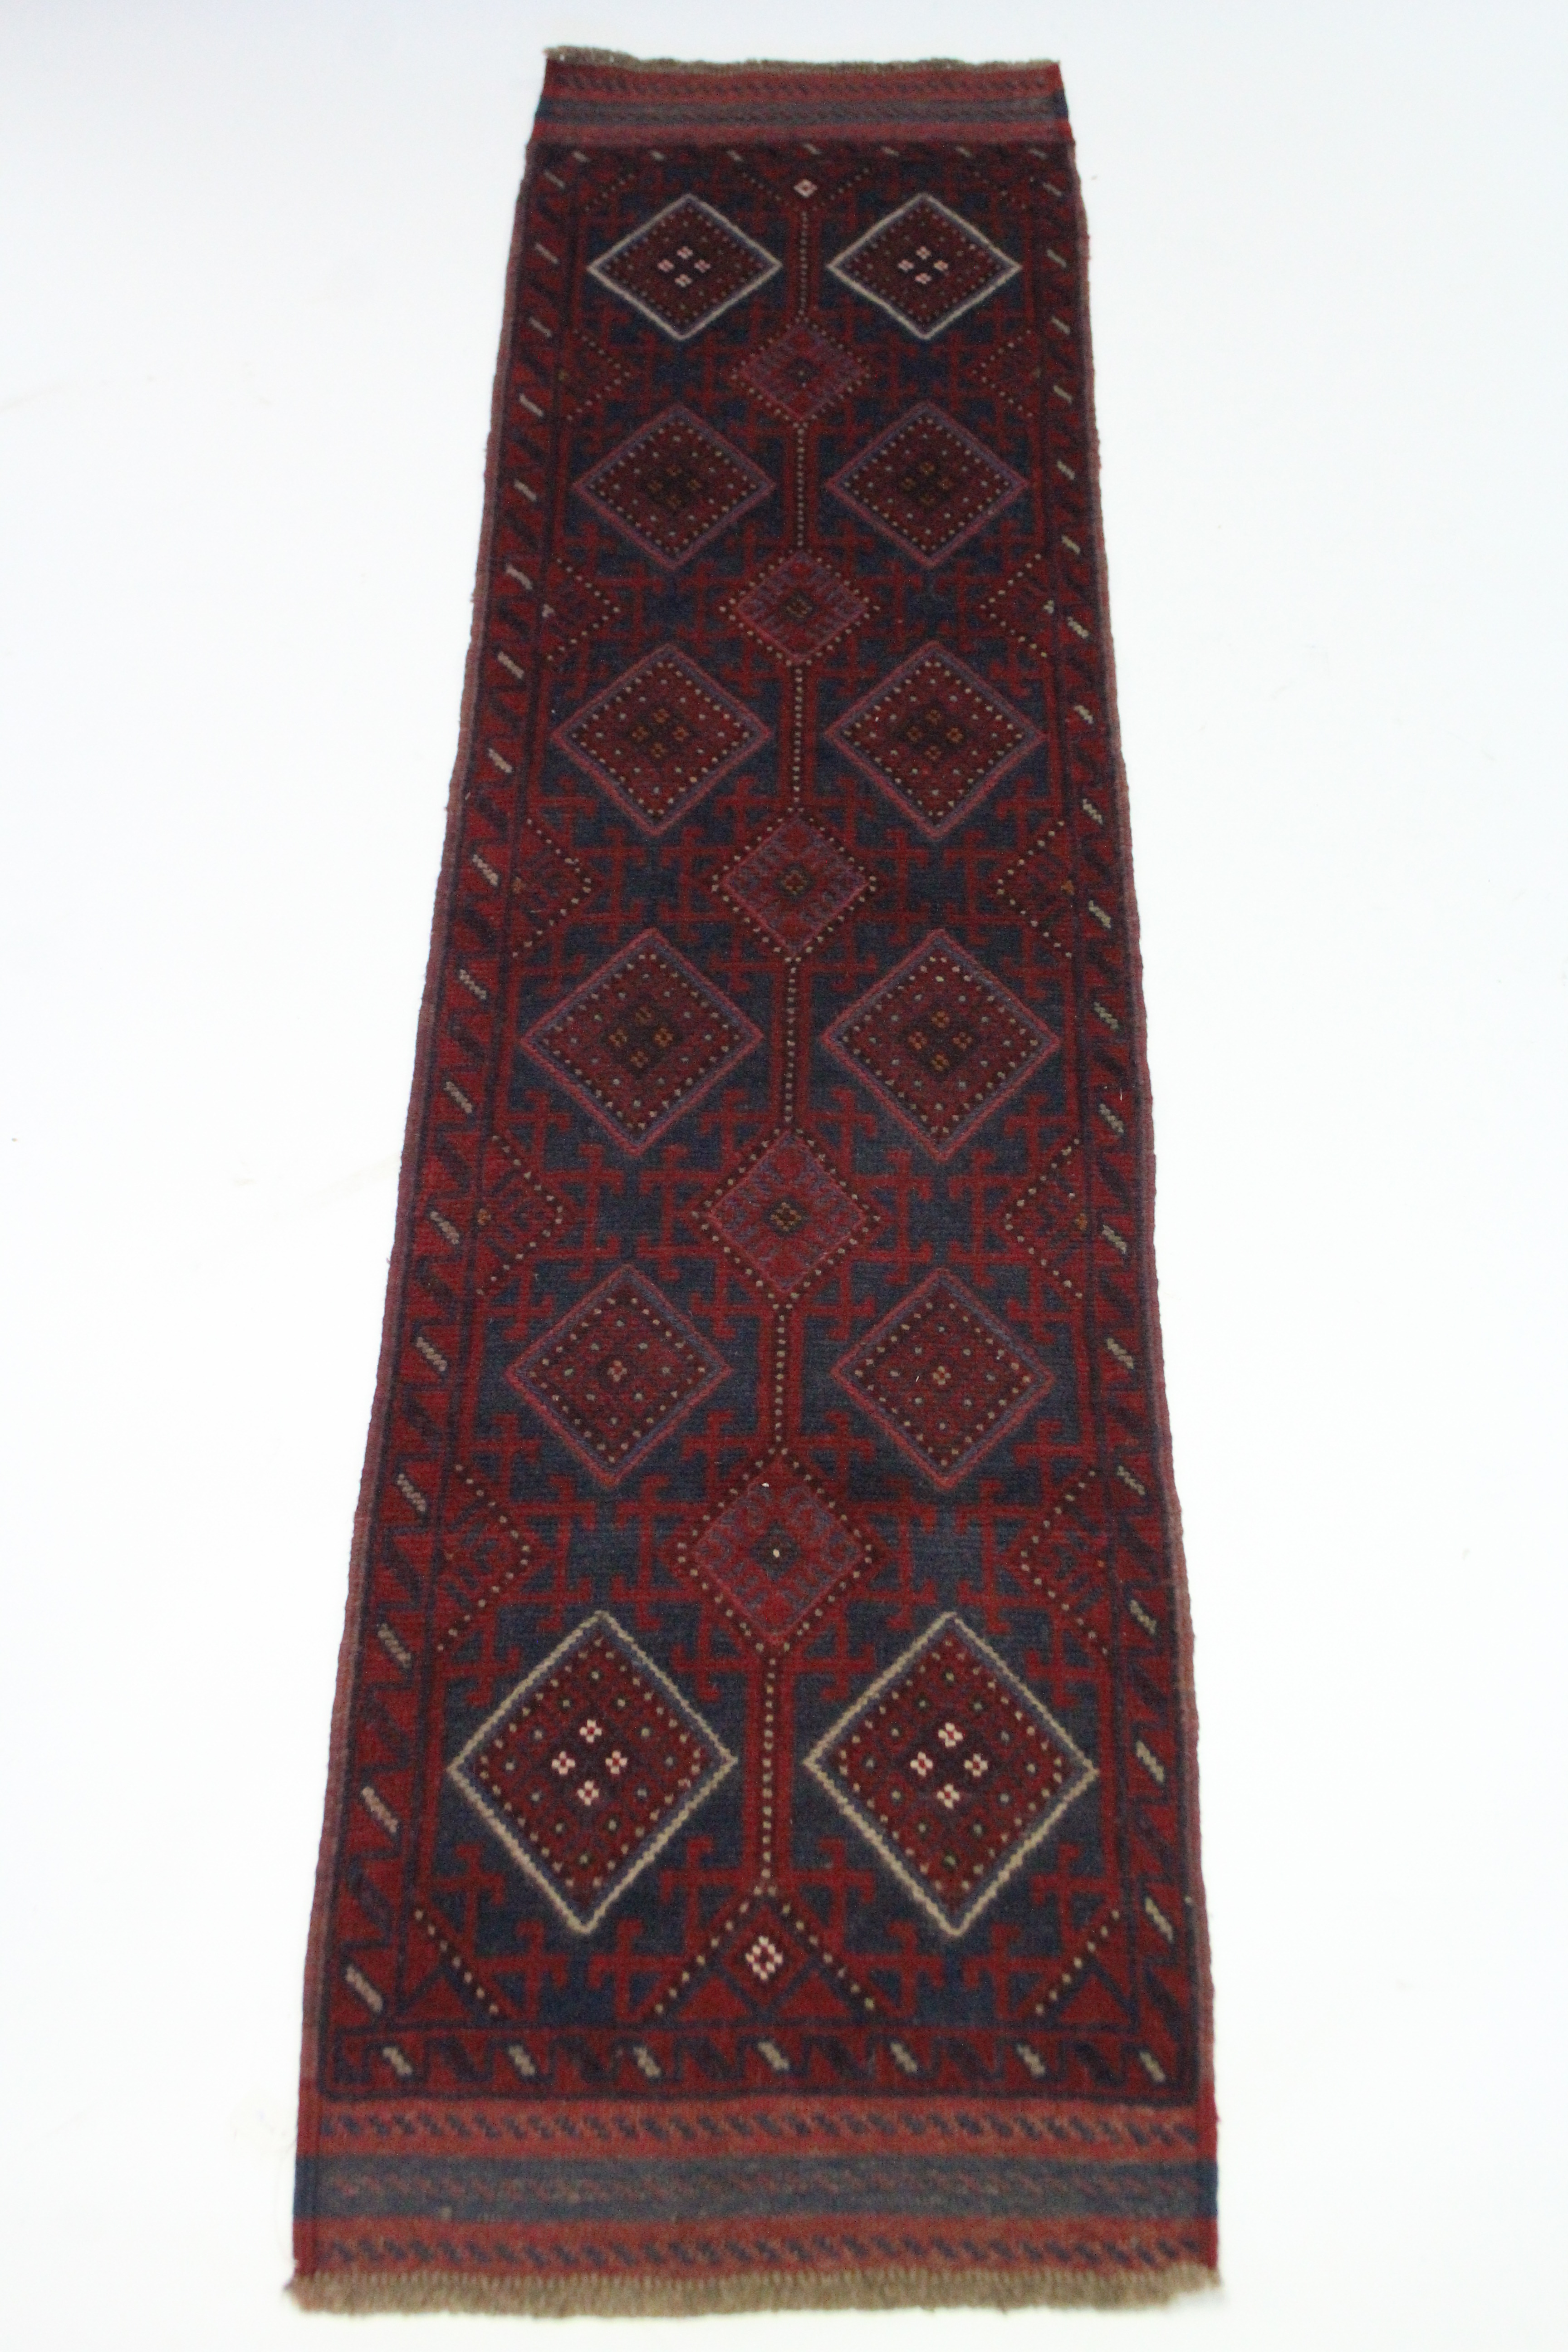 A Meshwari runner of deep blue, crimson, & ivory ground with two rows of six & one row of five